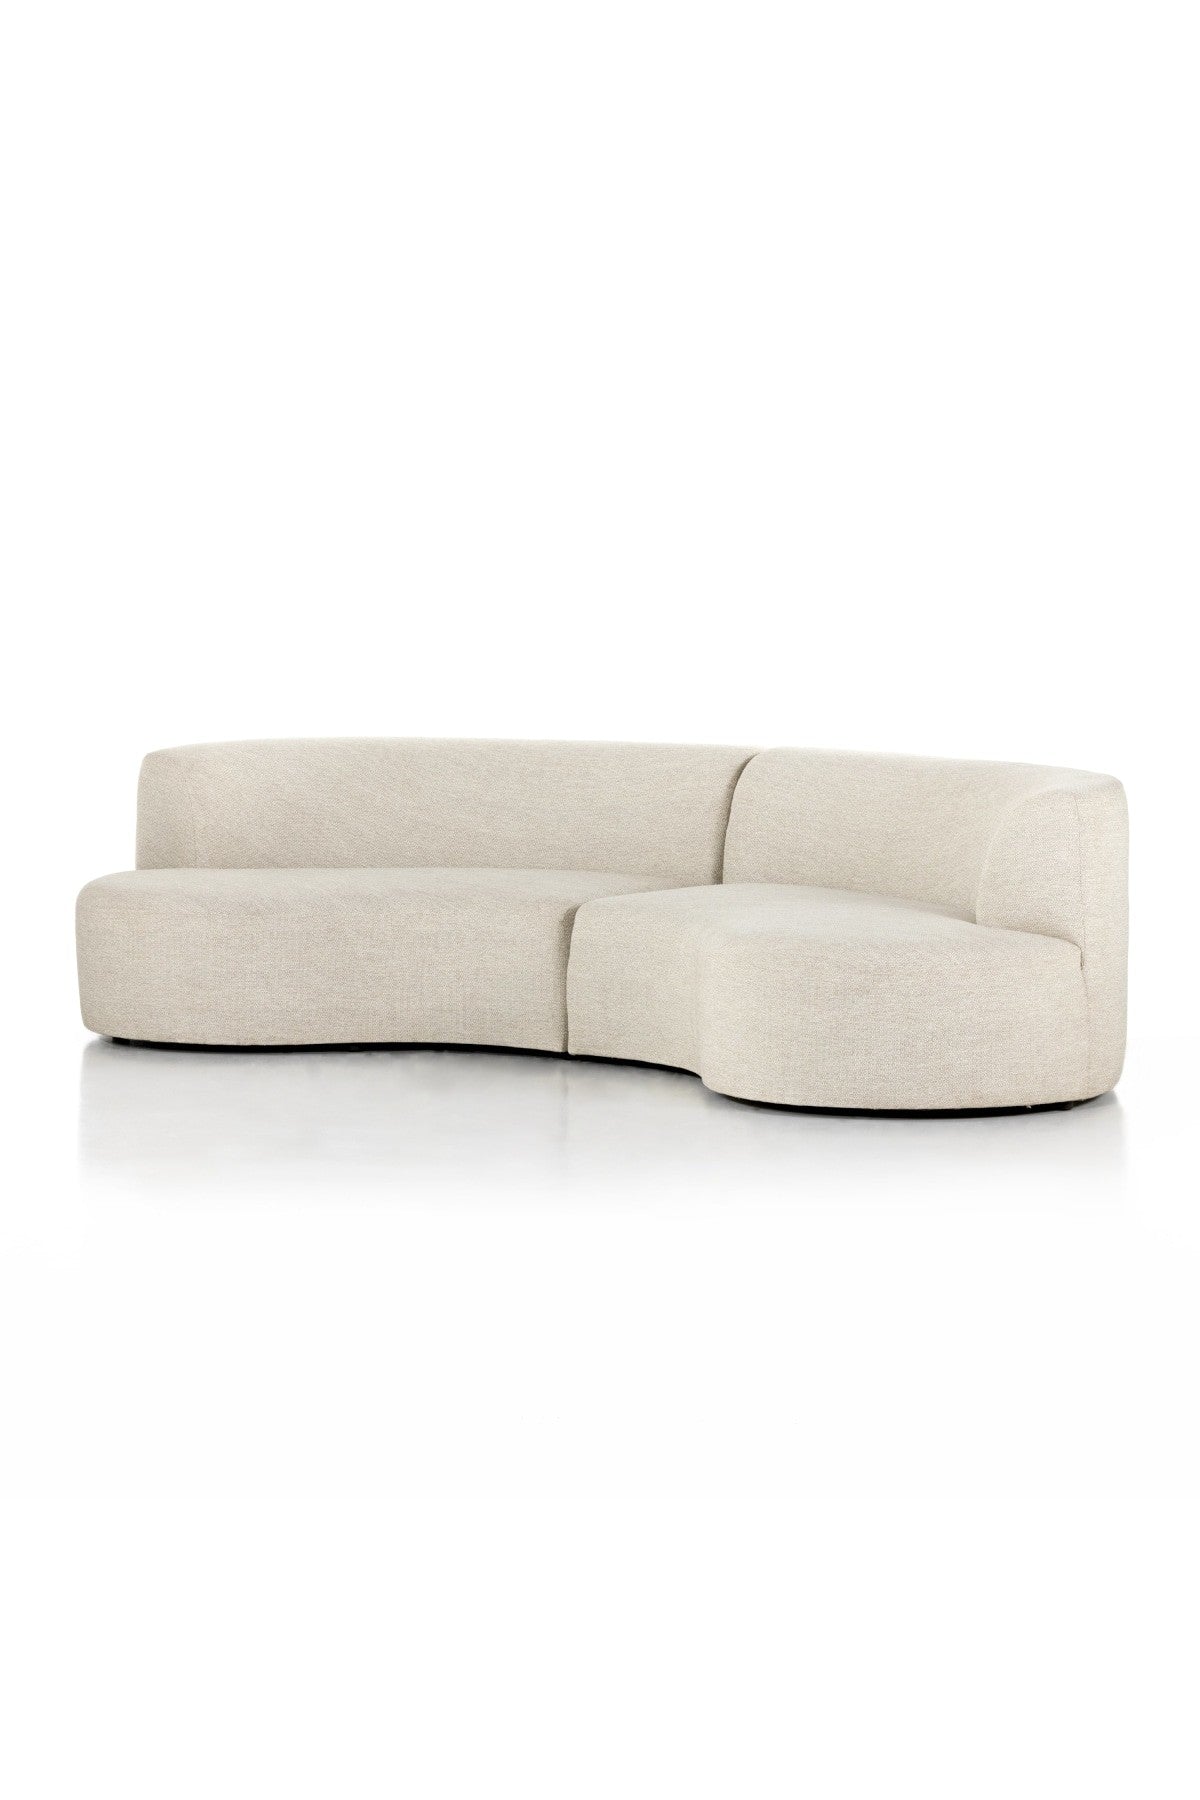 Parma Outdoor 2-Piece Sectional